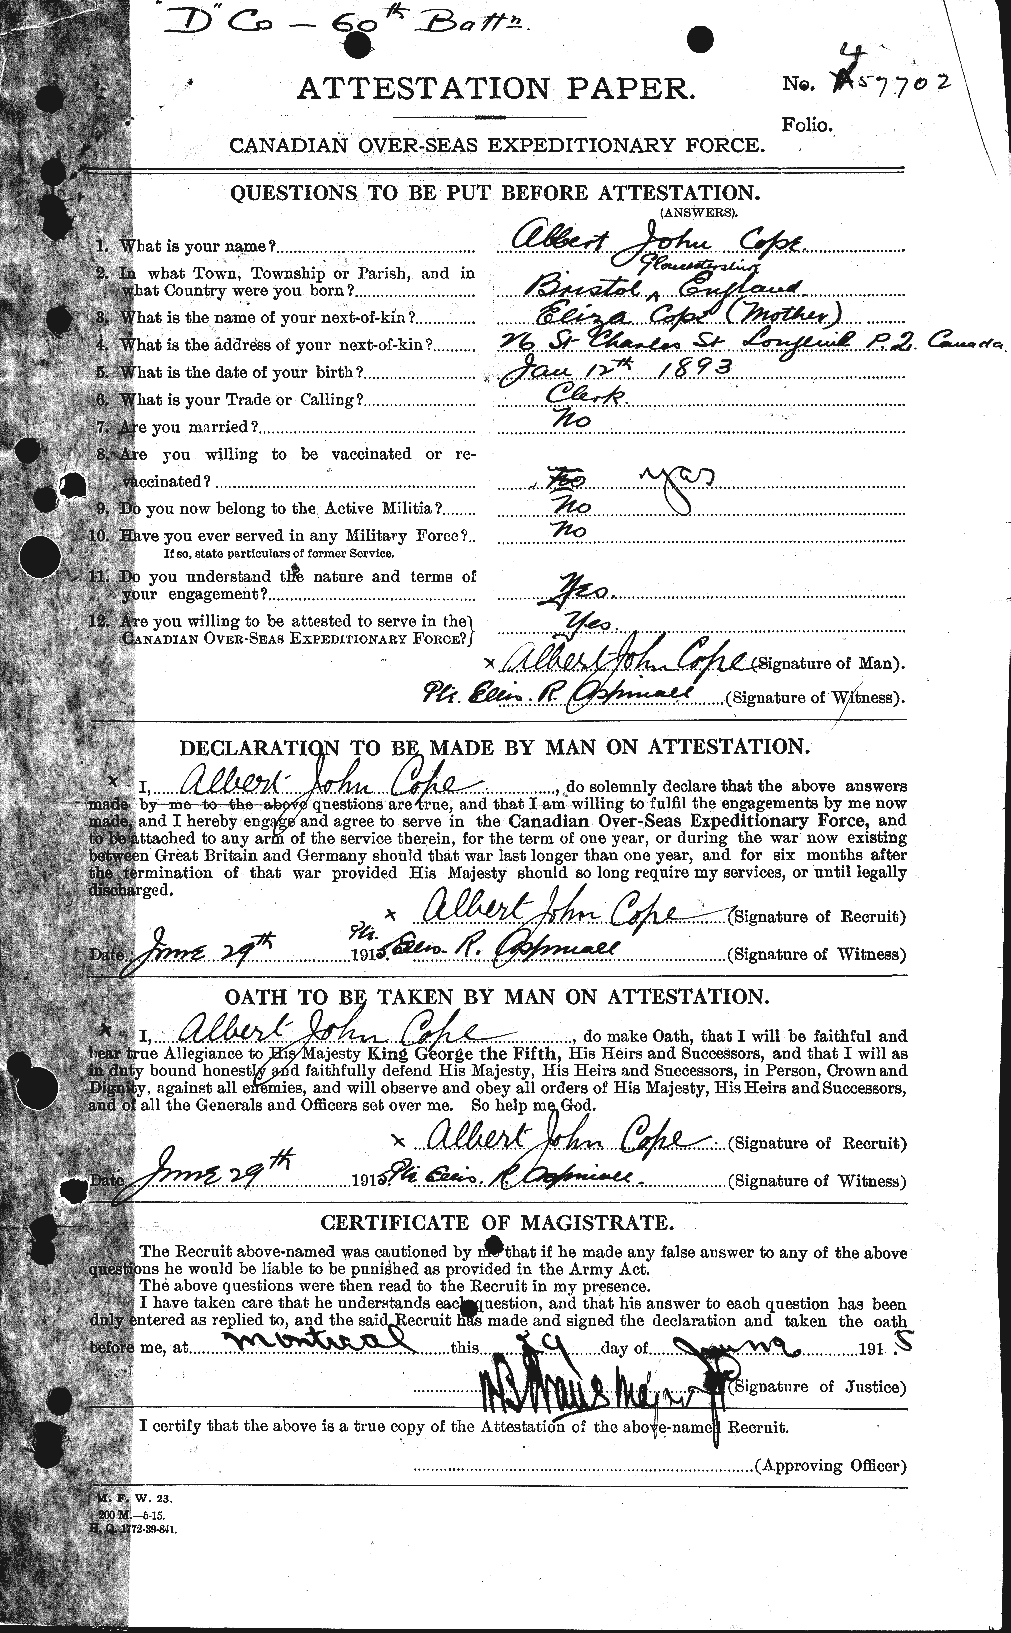 Personnel Records of the First World War - CEF 057471a